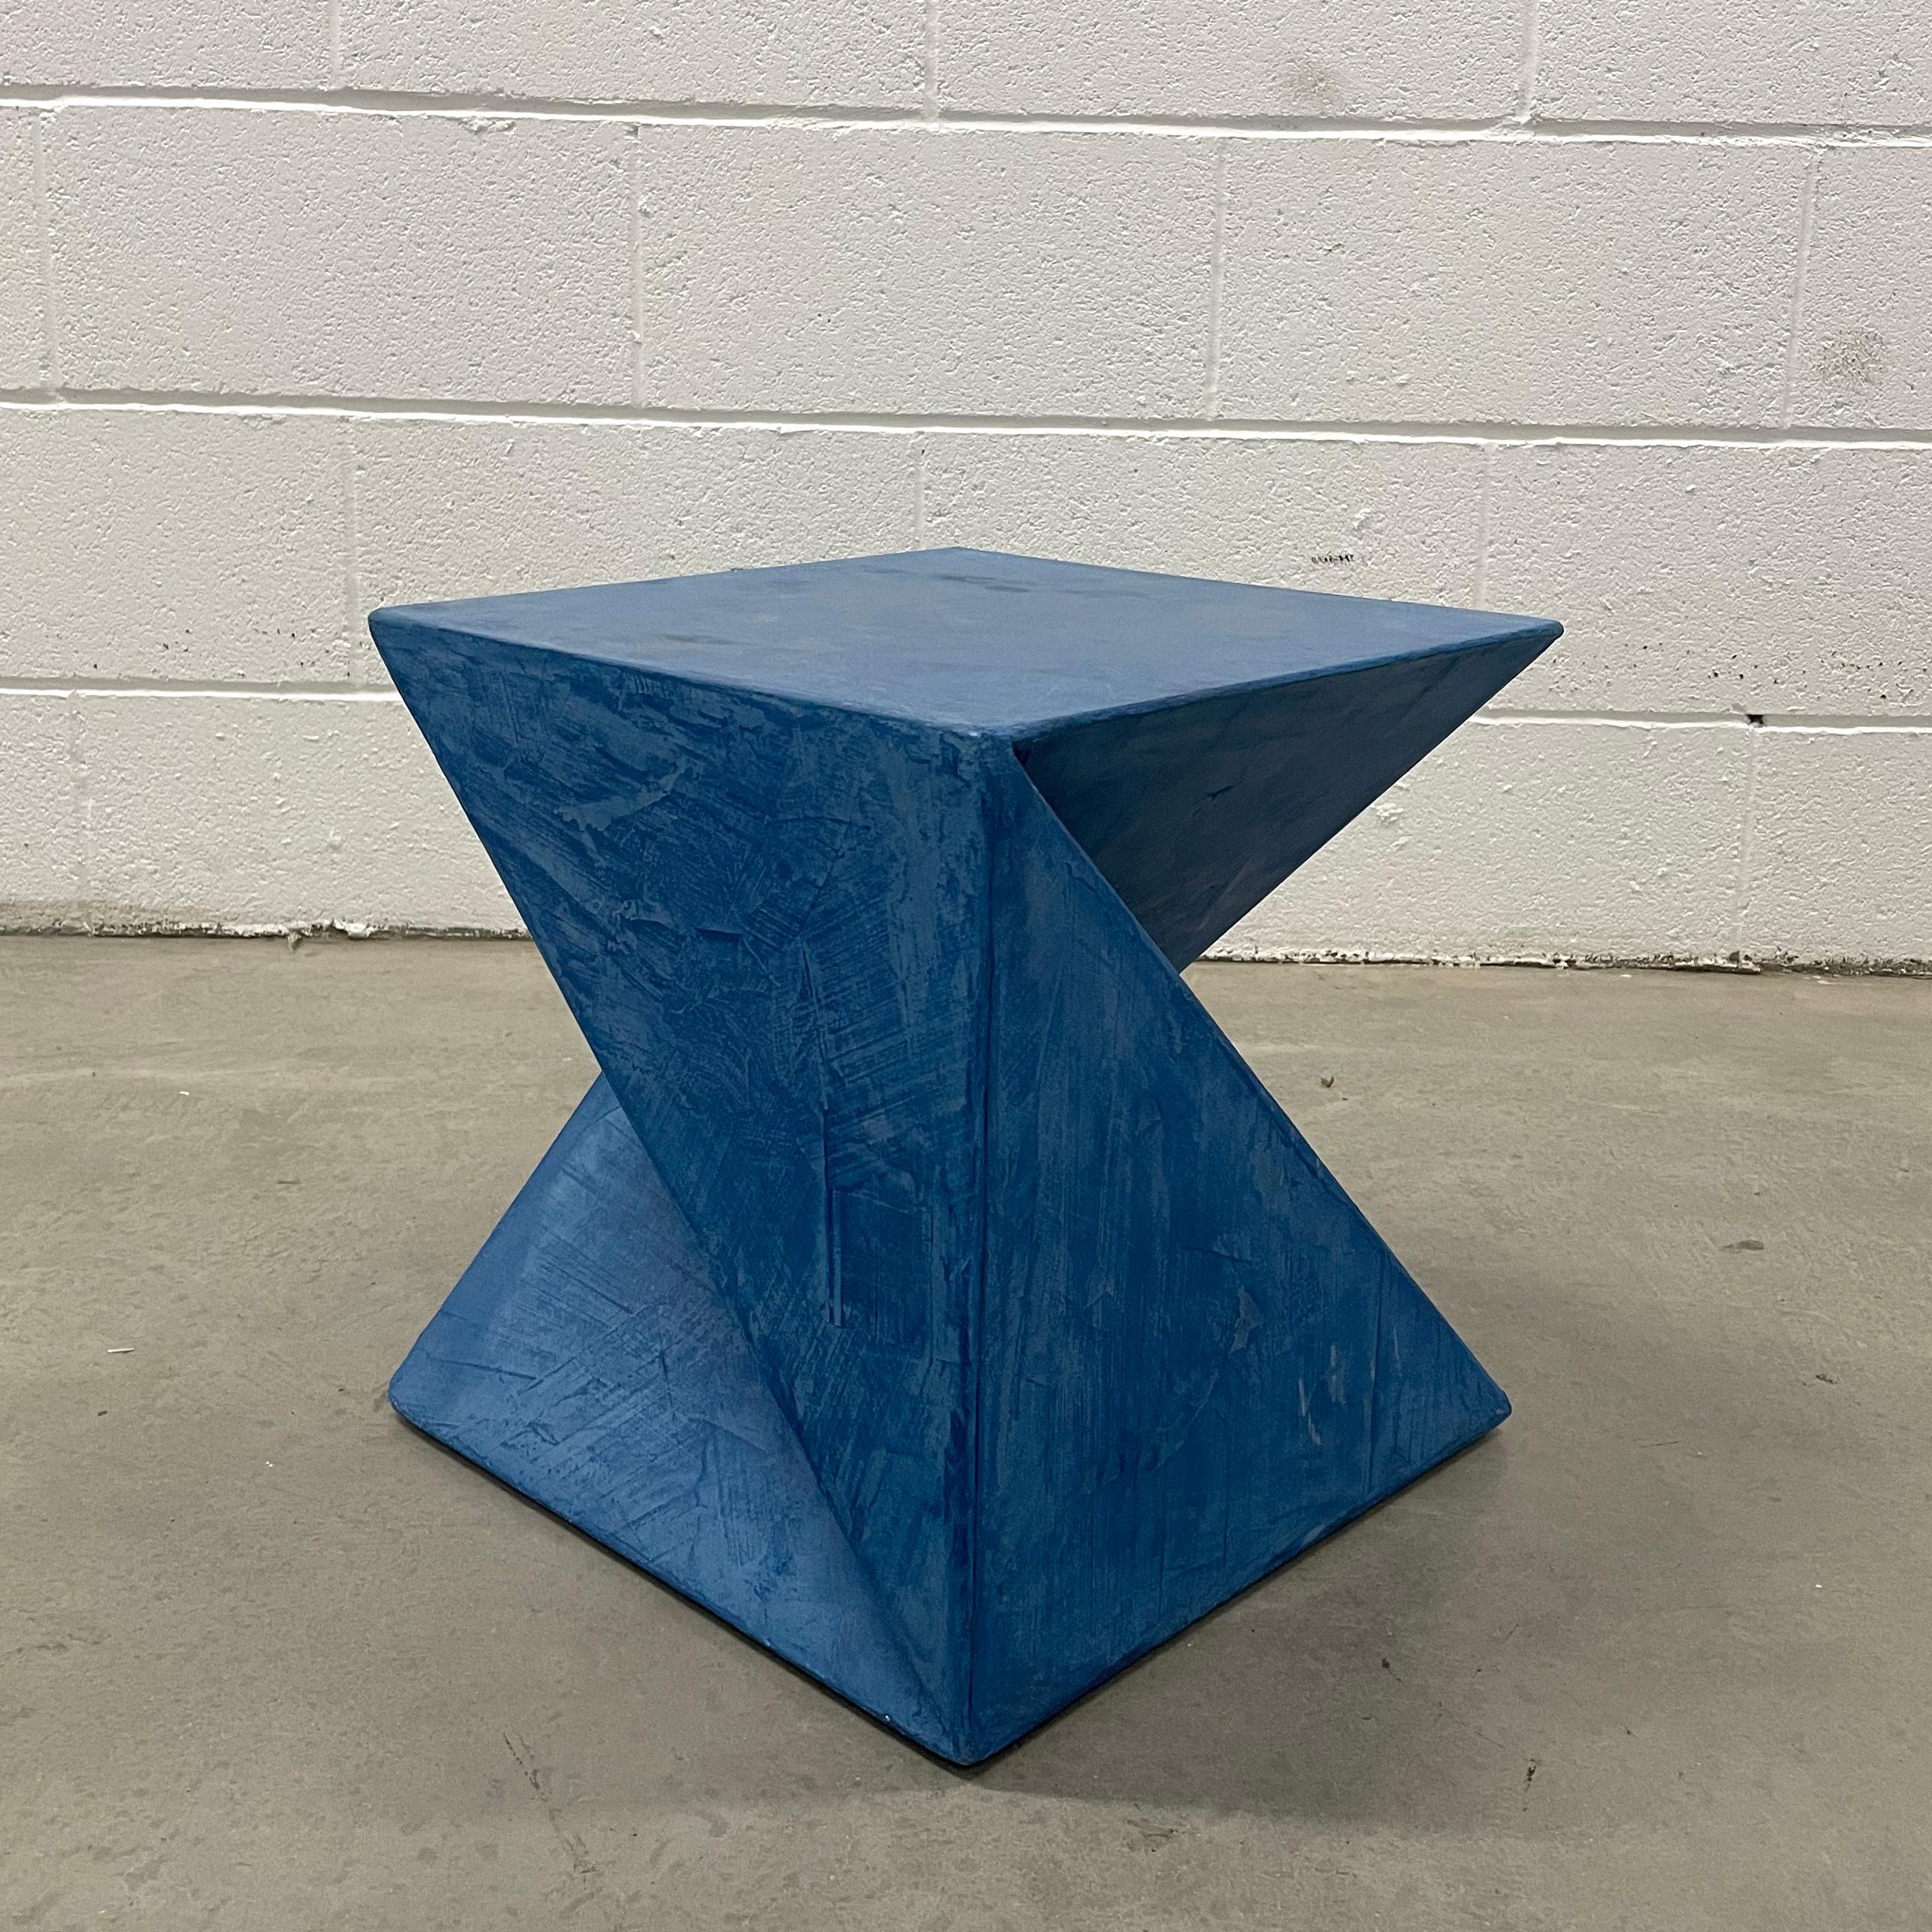 A multi-function Object. 
Artist Alexey Krupinin

Its complex geometric shape has a durable finish and is made of wood with multiple layers of hand-trowelled Venetian plaster, creating unique silhouettes from different angles. Tooling marks and